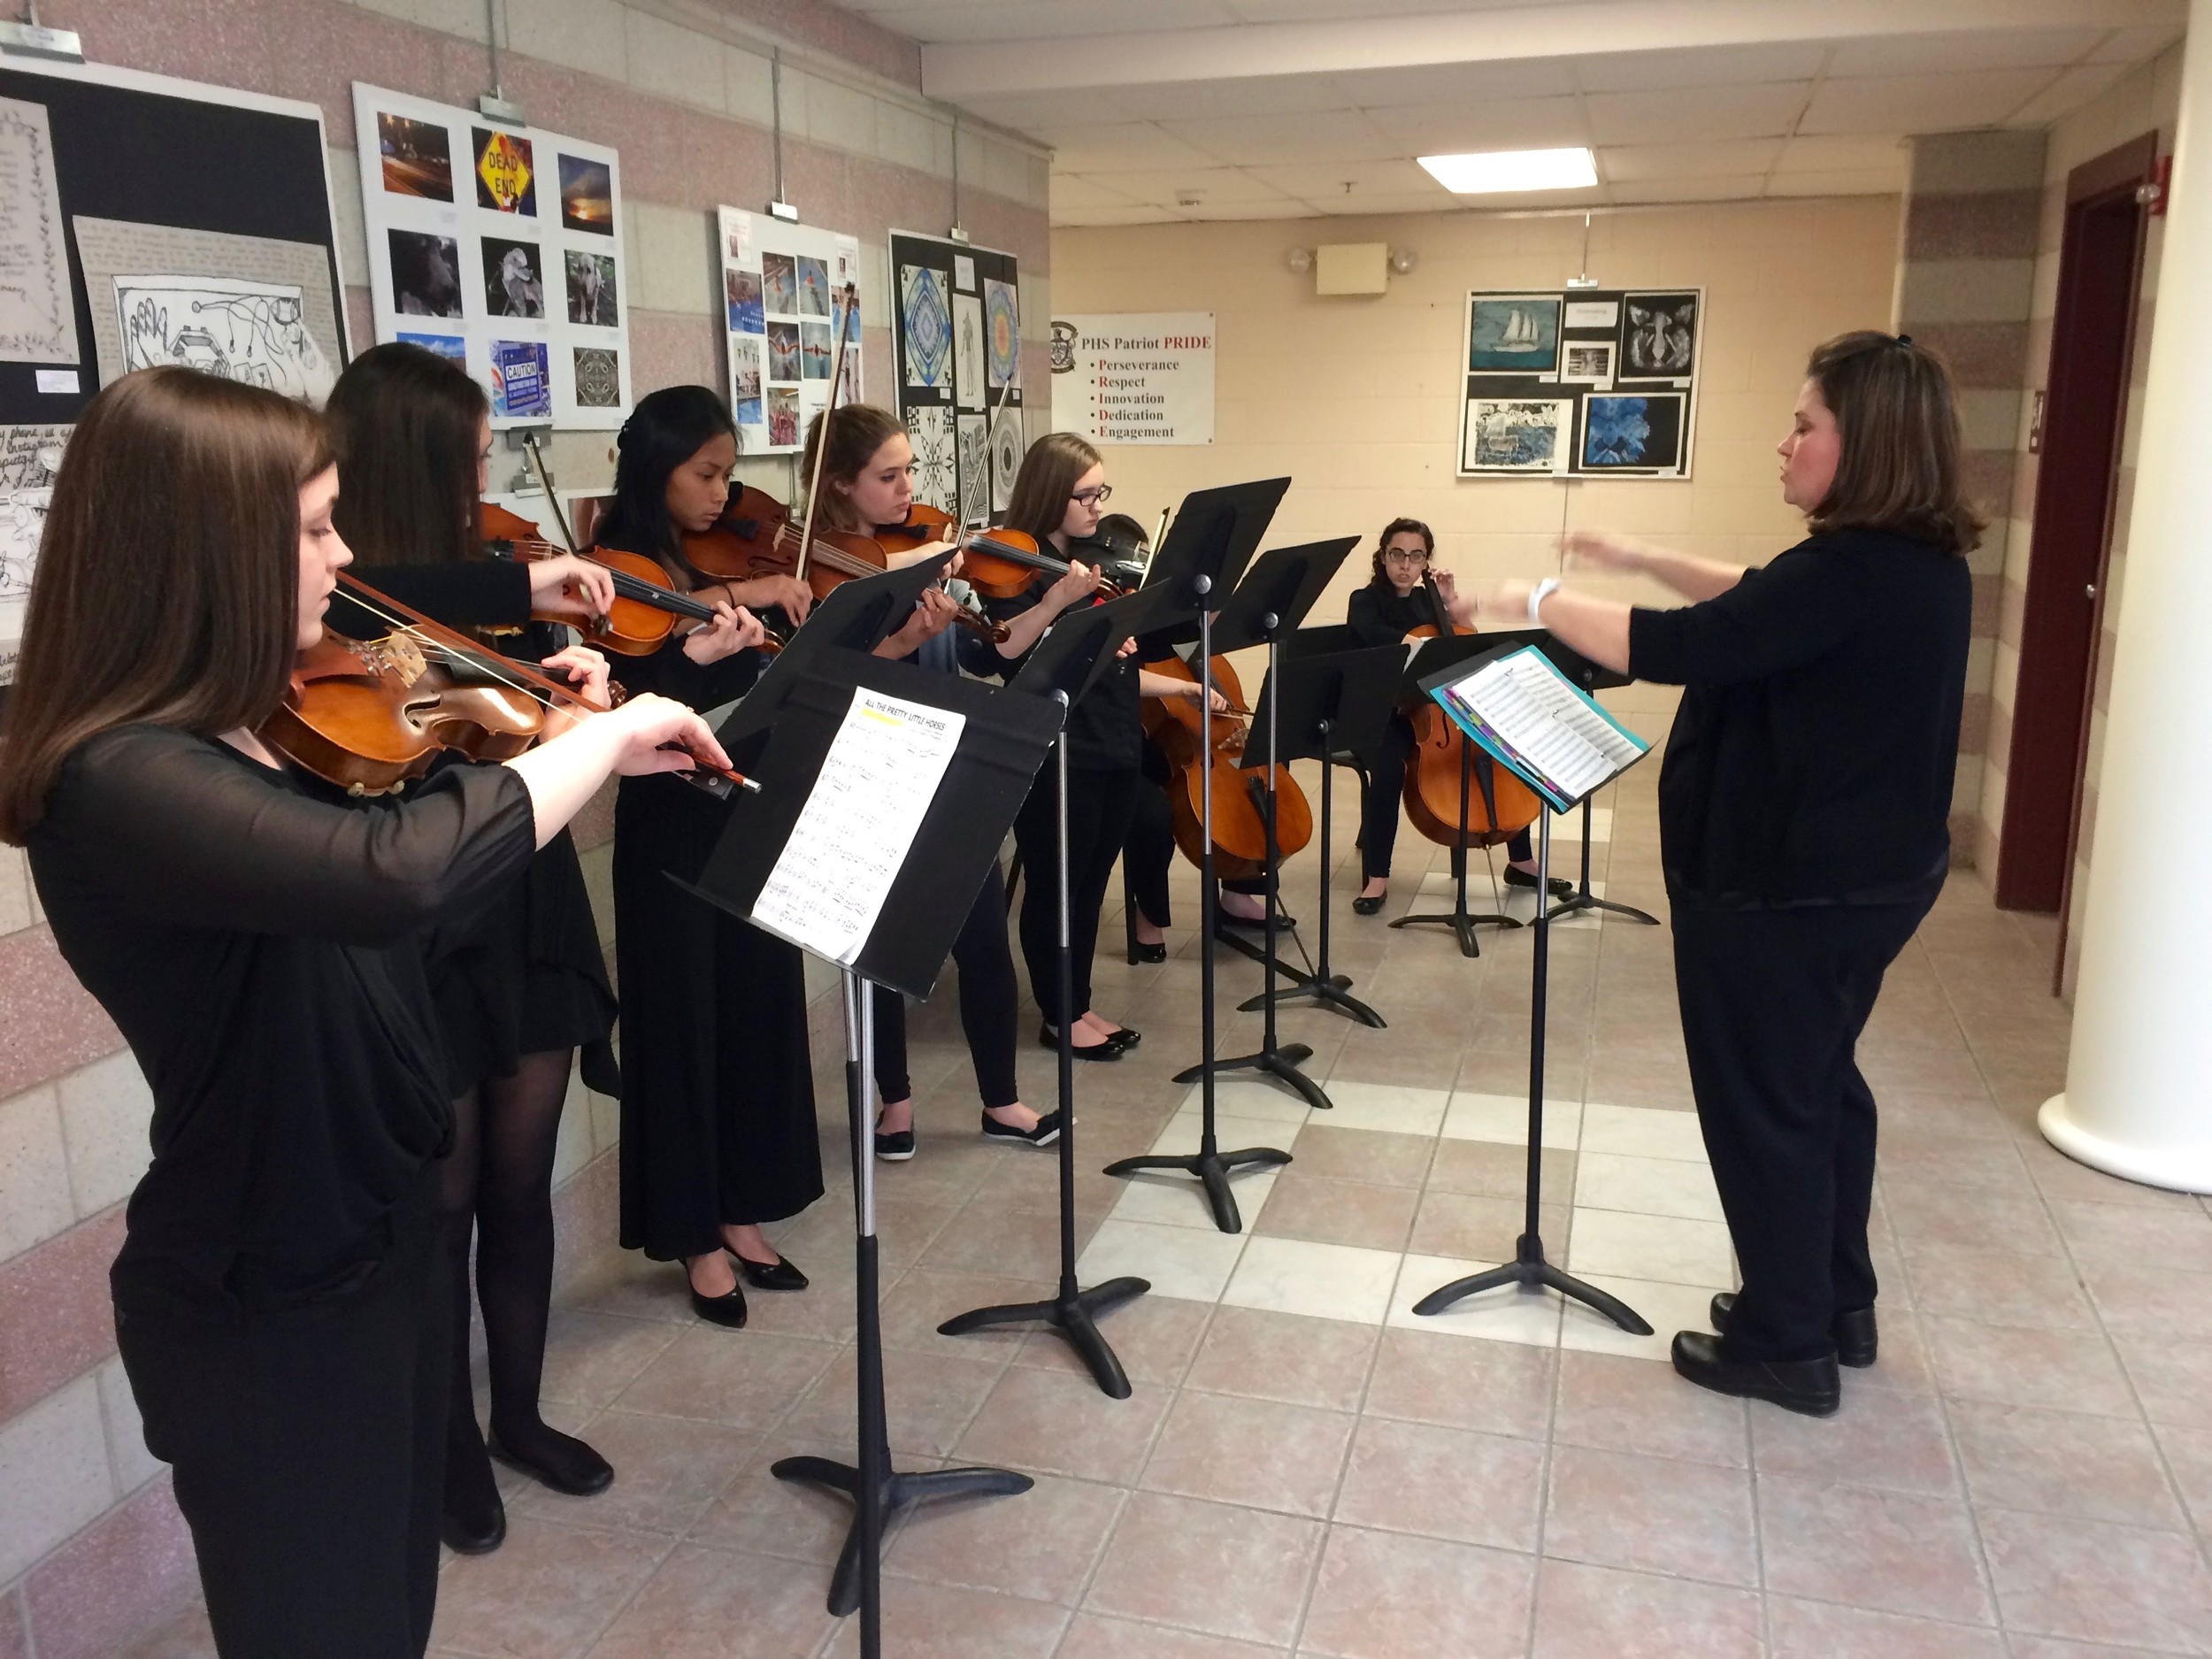 The PHS strings ensemble performs prior to an opening program on Sunday. The PHS vocal ensemble and actors in the upcoming school production of the musical “Grease” also performed.